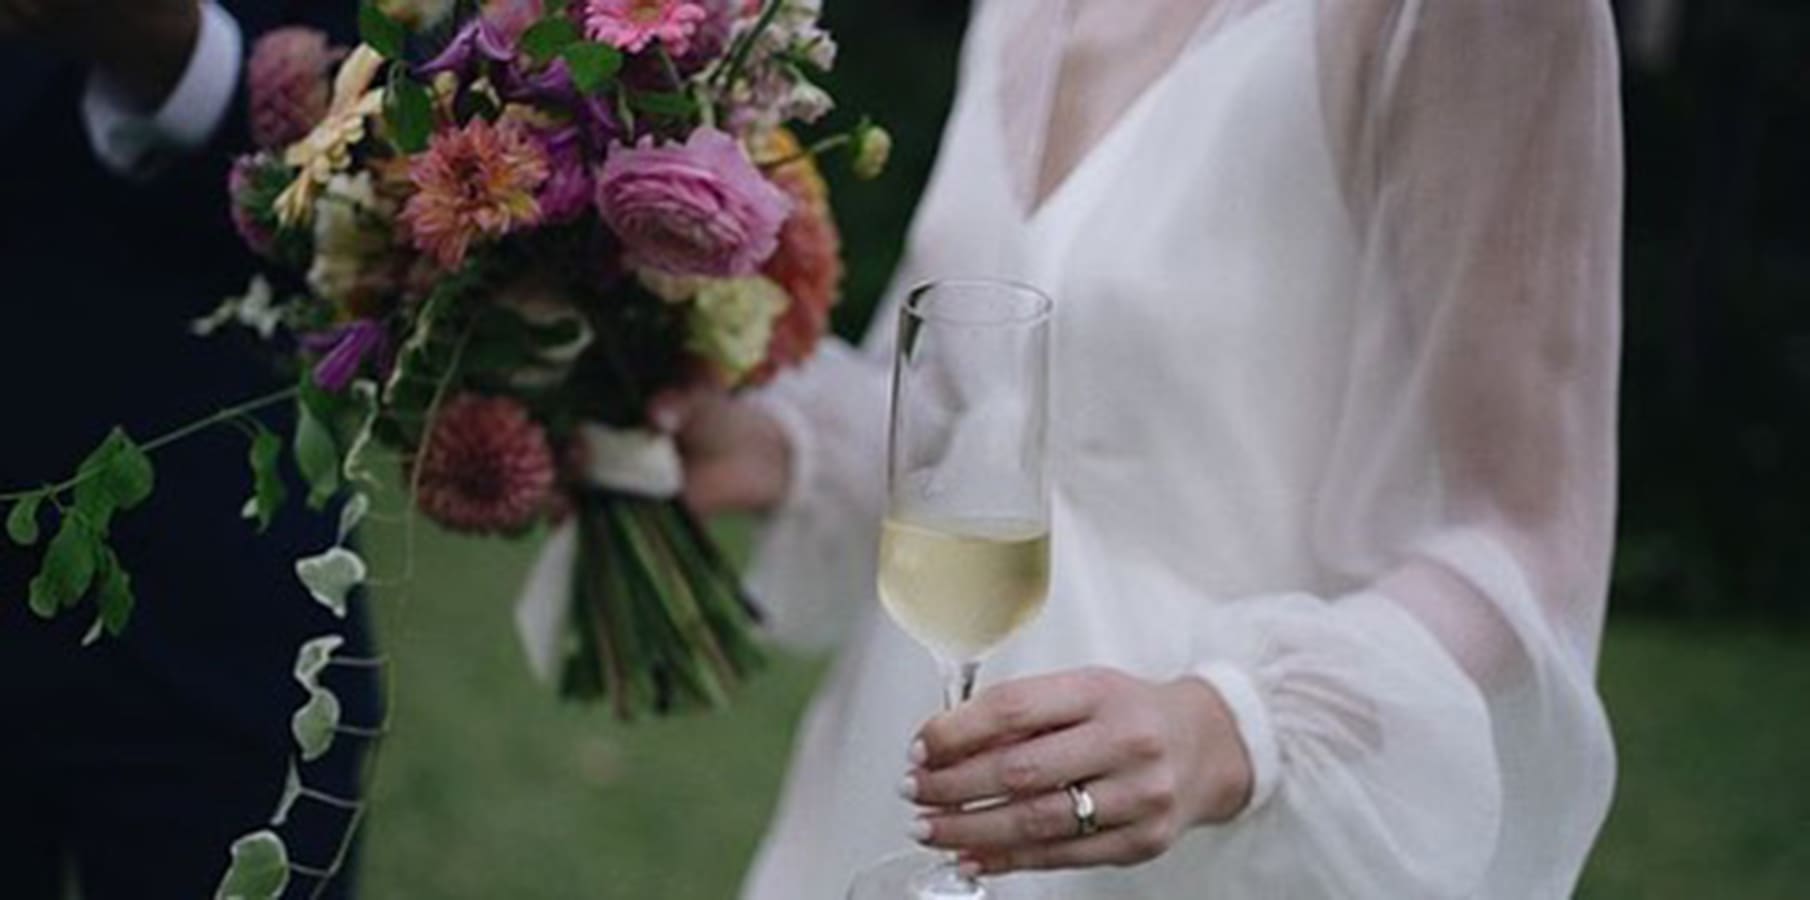 The bride holds her bridal bouquet in one hand and a champagne glass in the other with grace.